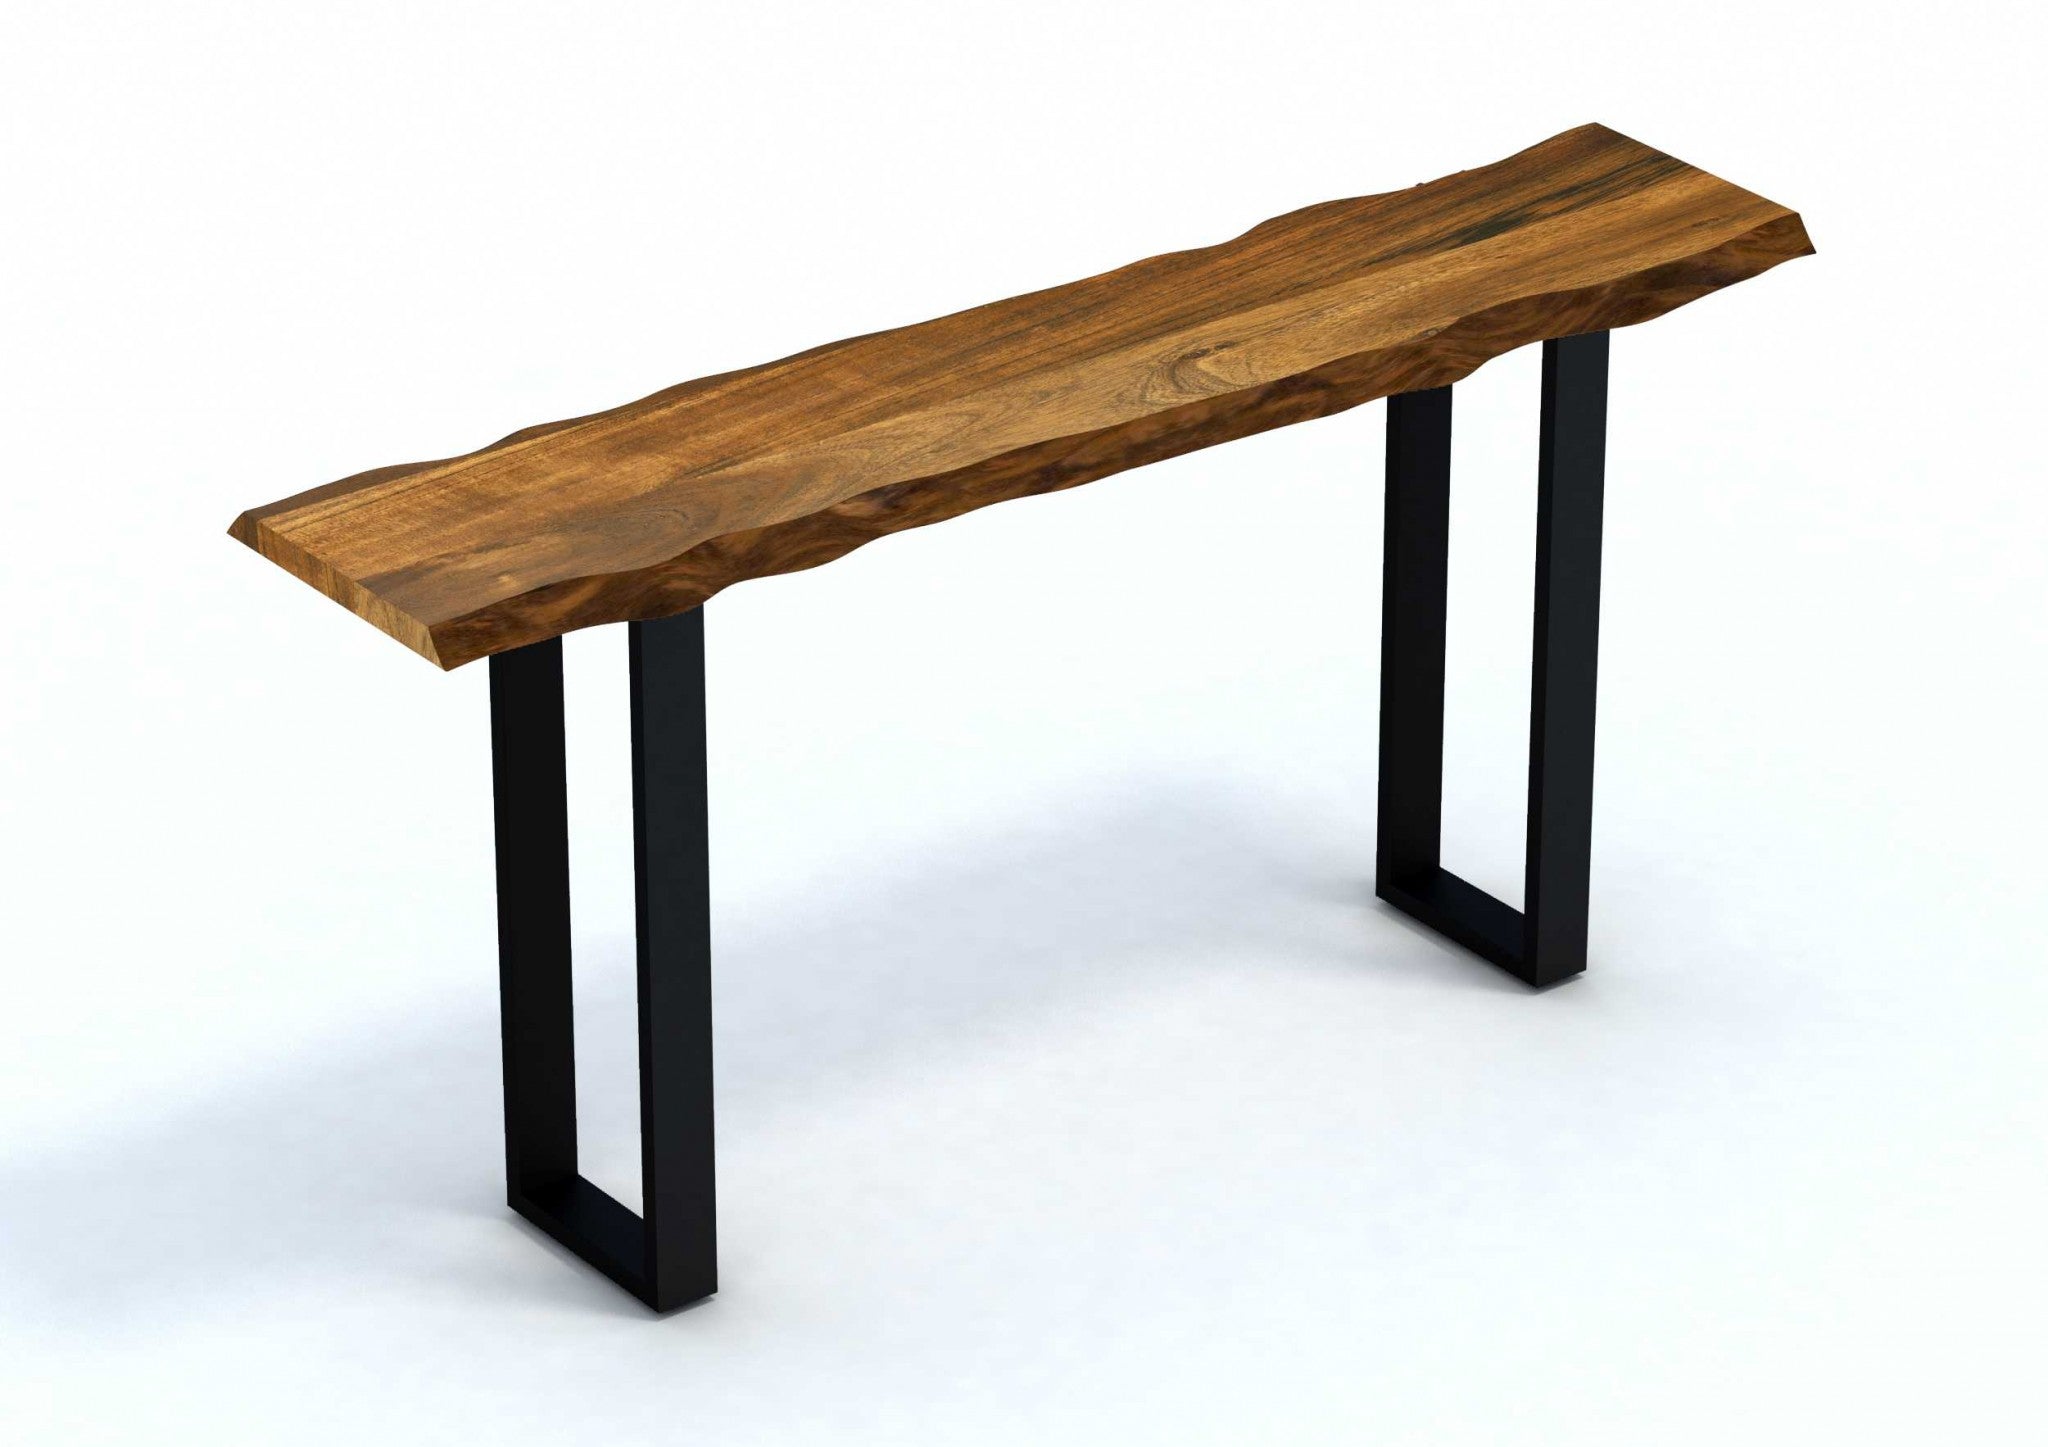 69" Brown and Black Solid Wood Live Edge Console Table